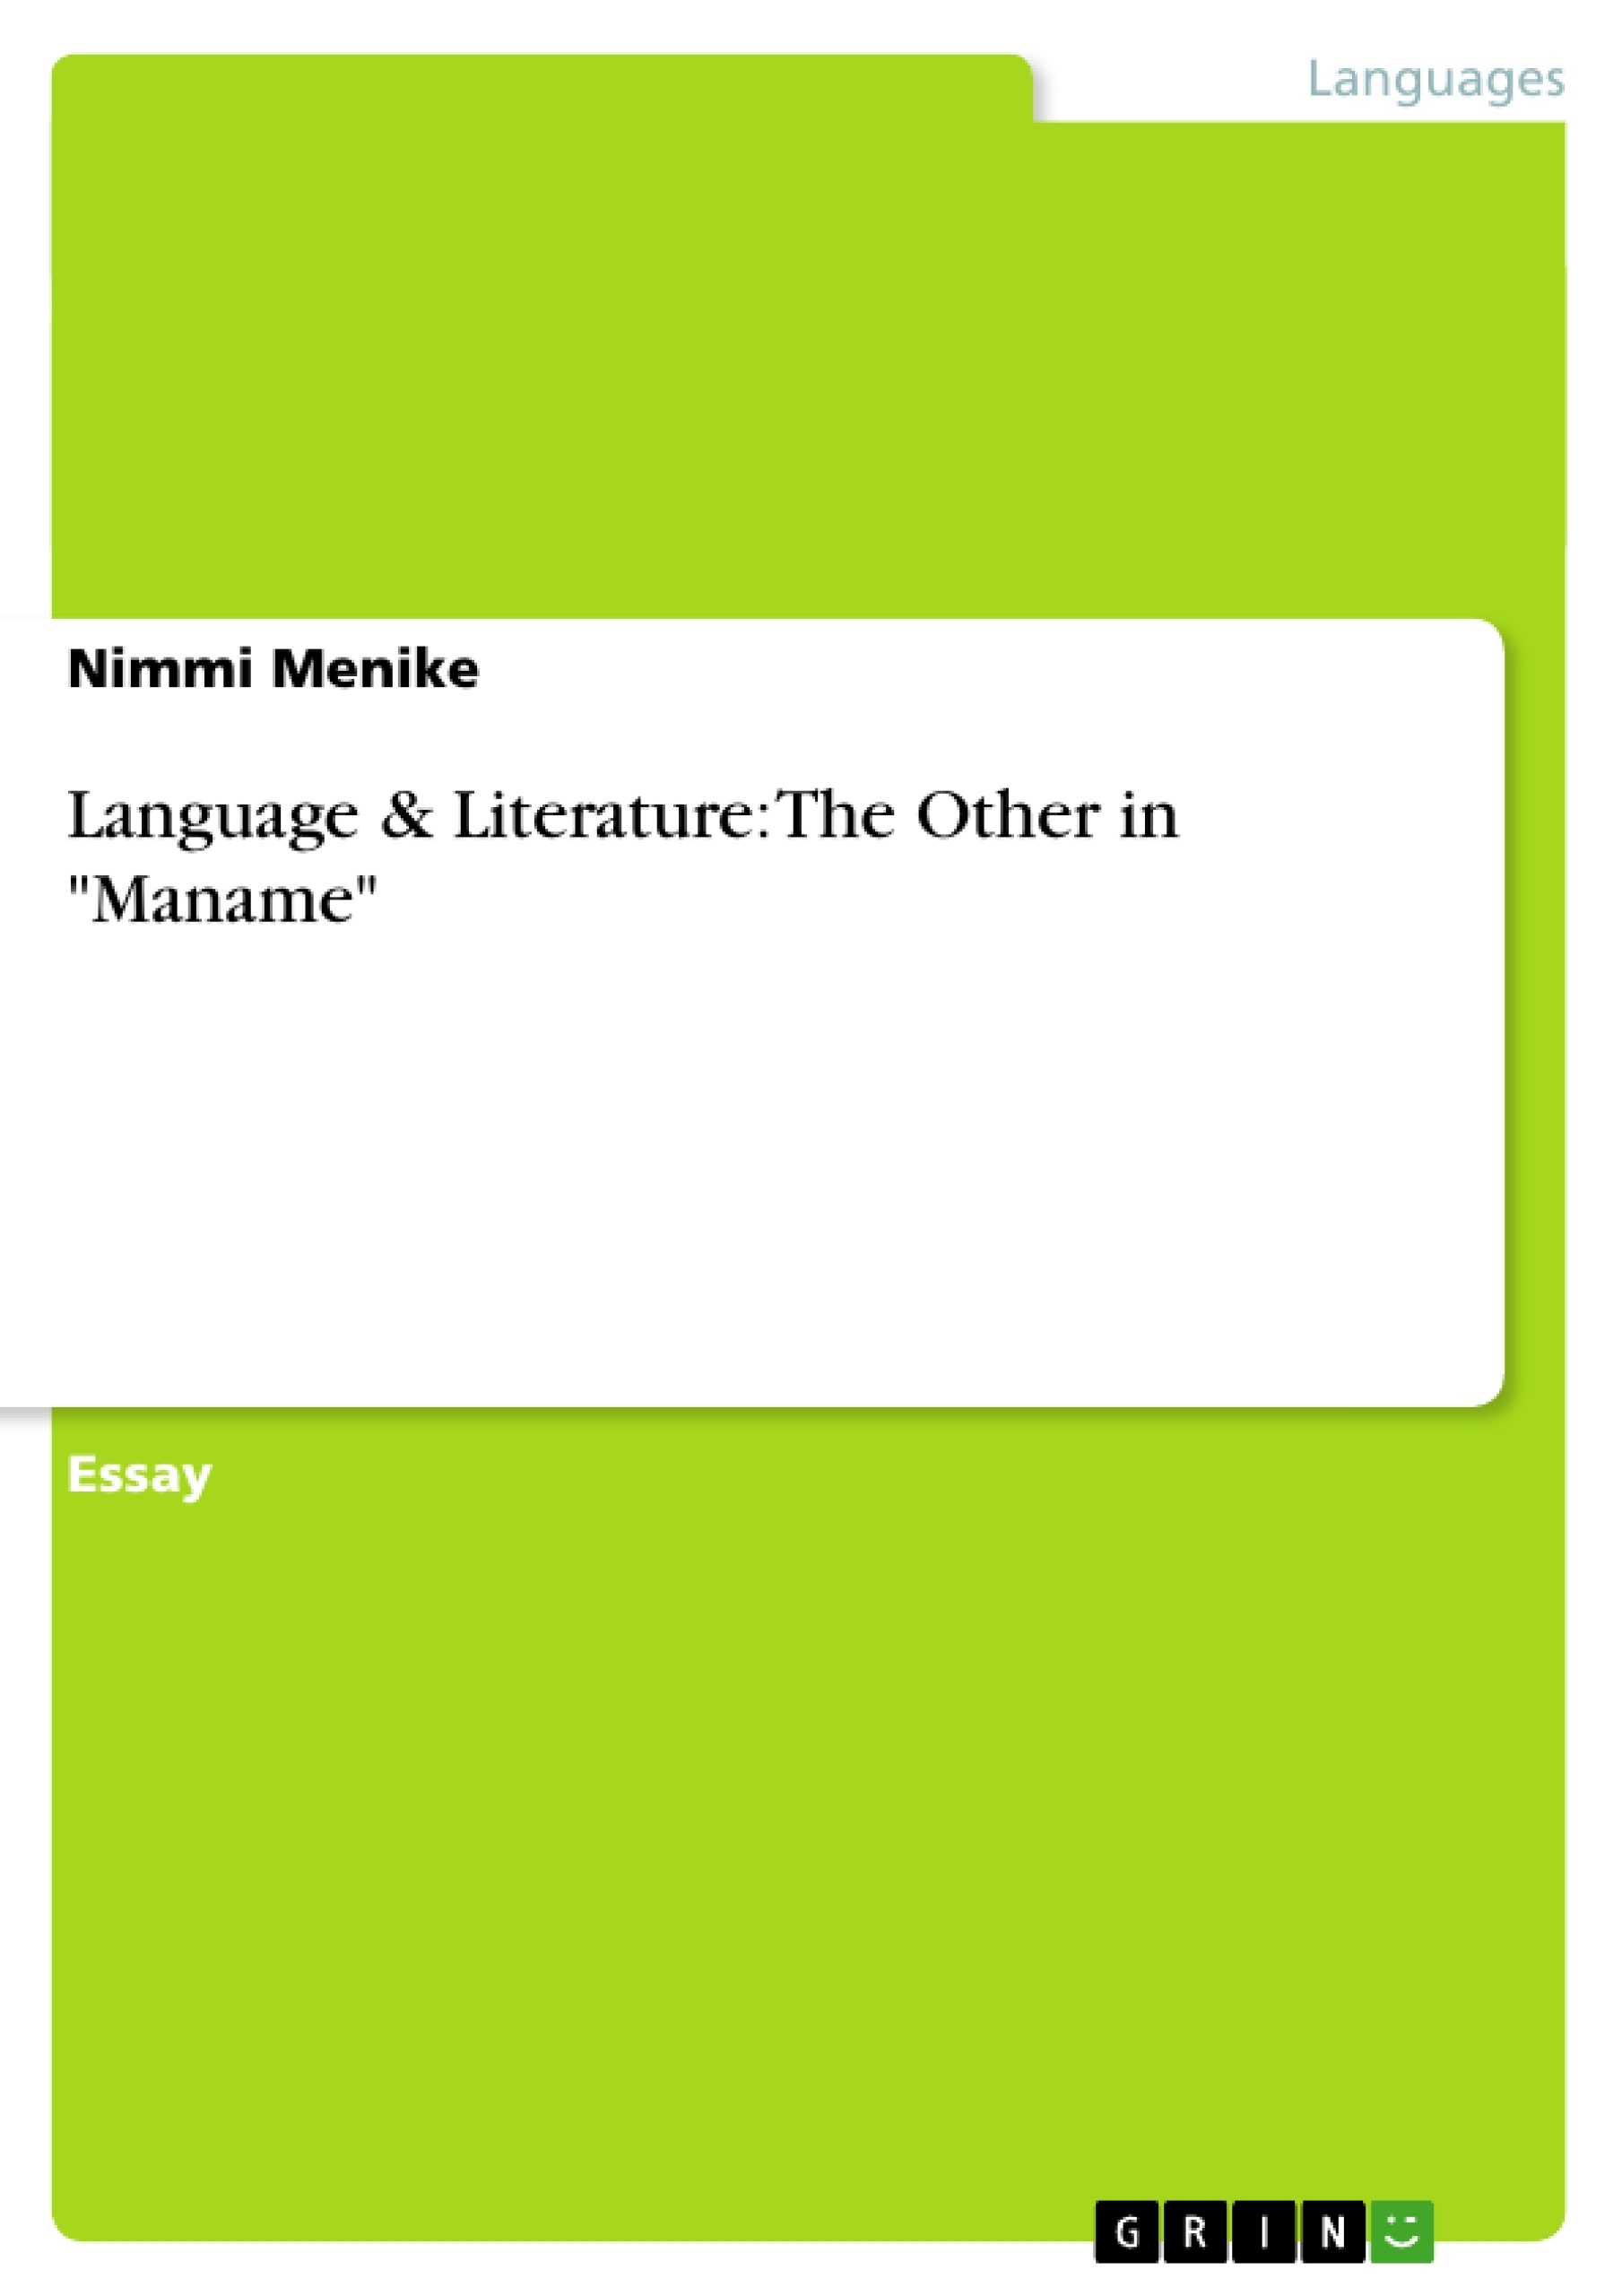 Title: Language & Literature: The Other in "Maname"